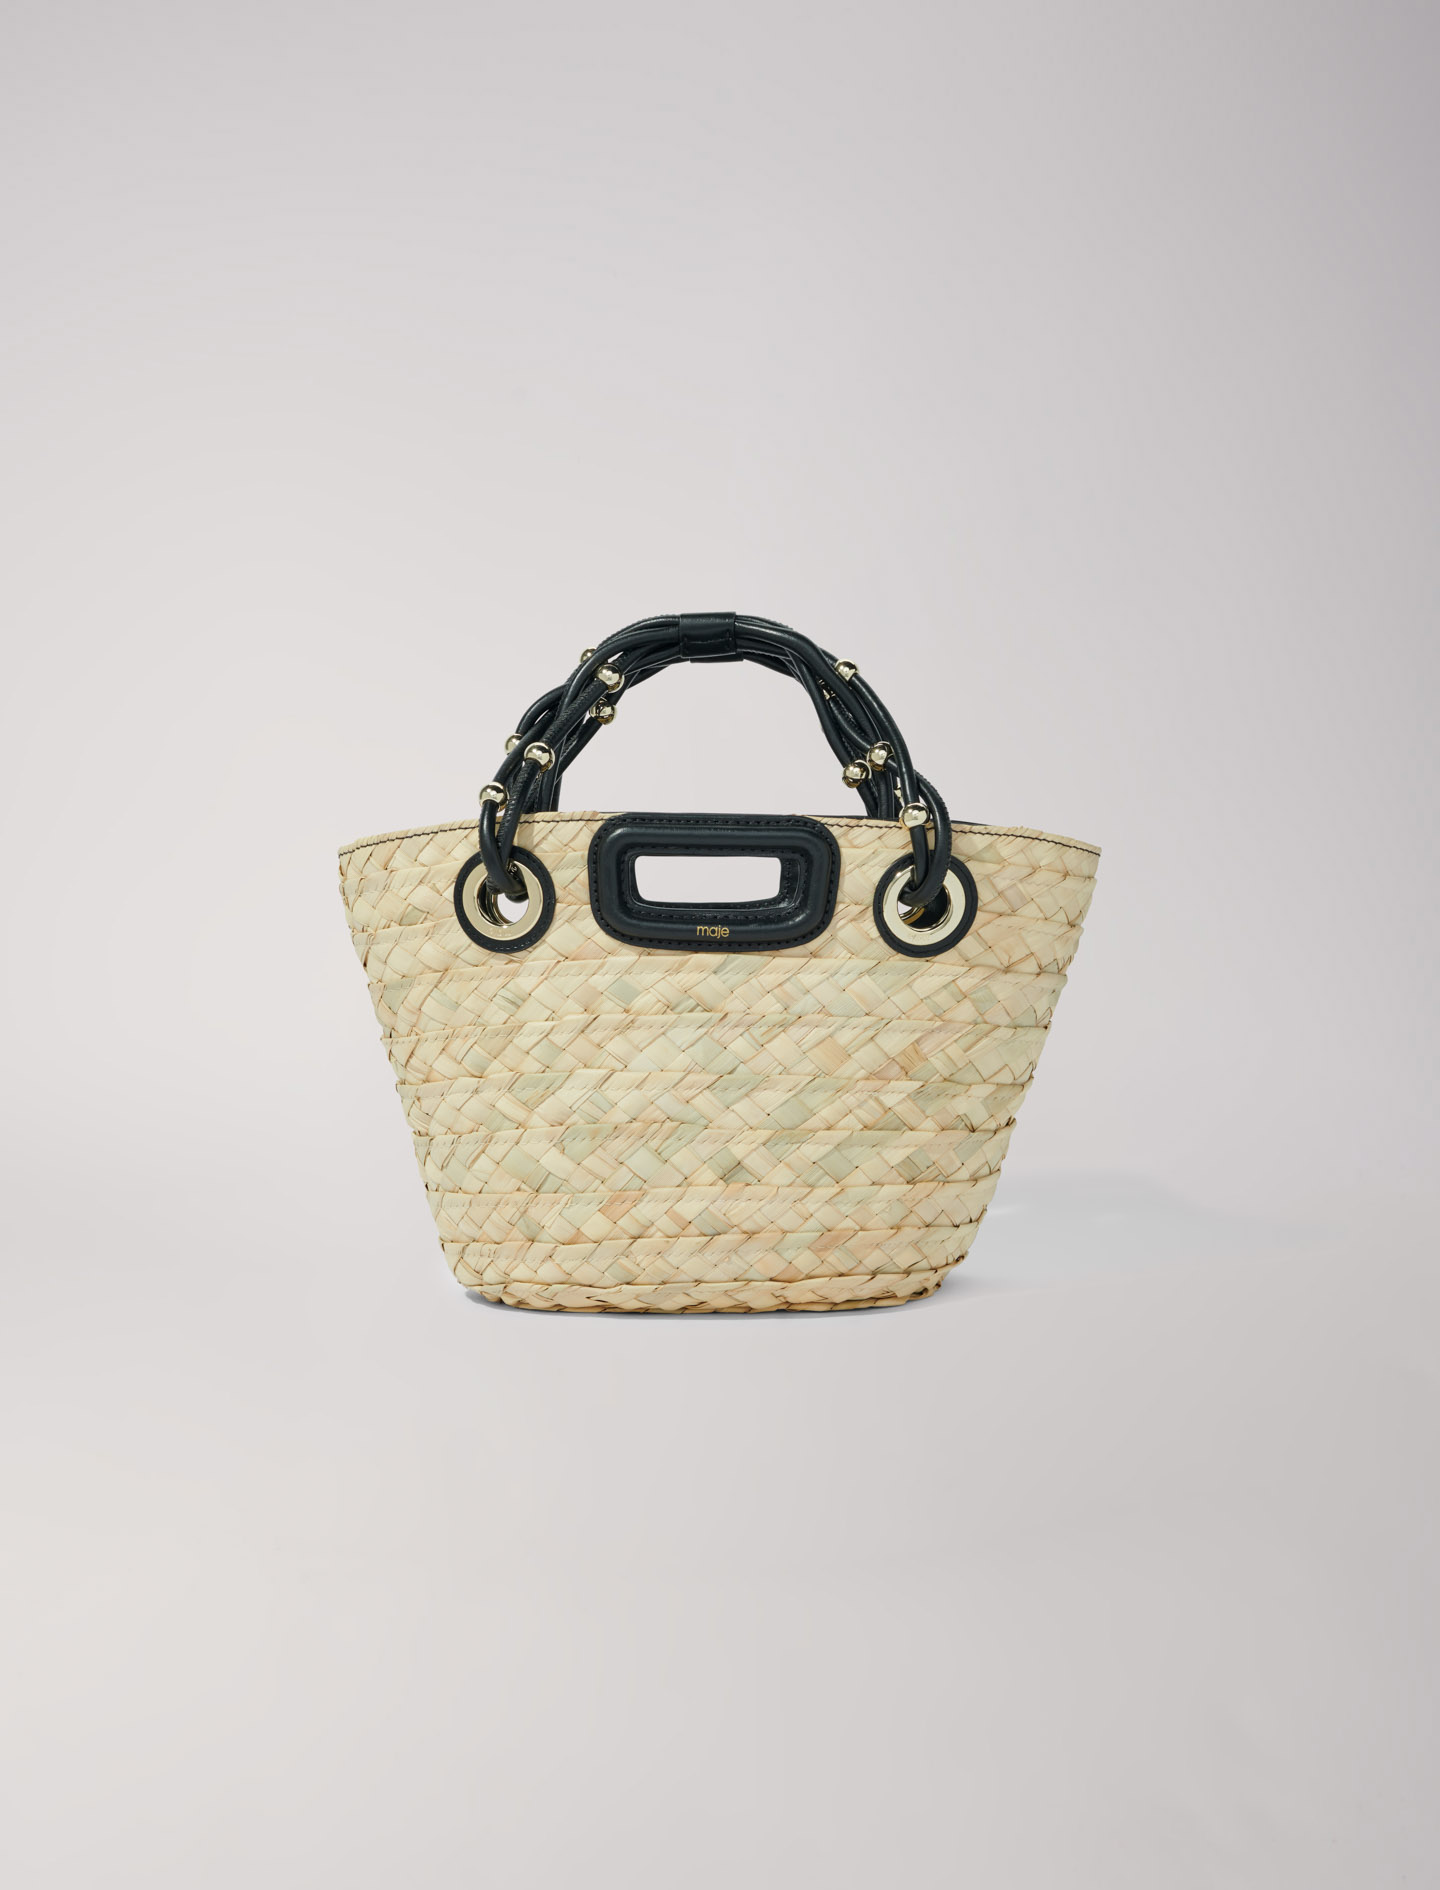 Mixte's palm Lining: Mini woven basket bag for Spring/Summer, size Mixte-All Bags-OS (ONE SIZE), in color Black / Black